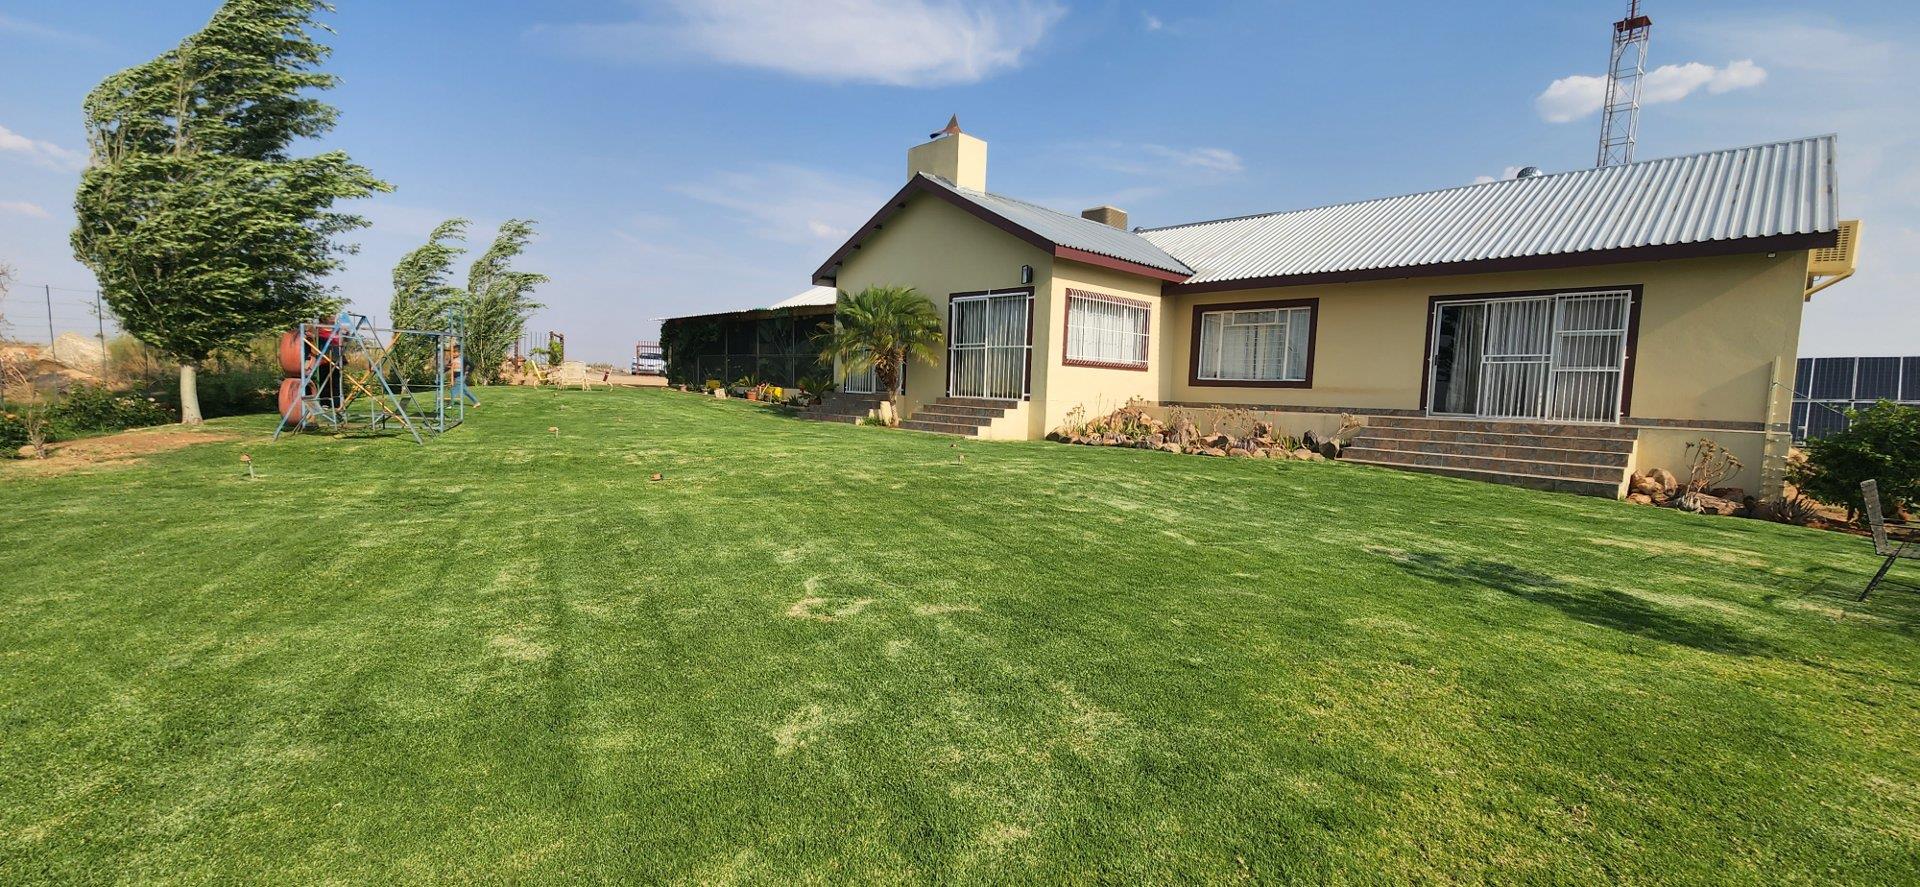 Farm to rent in Upington Rural